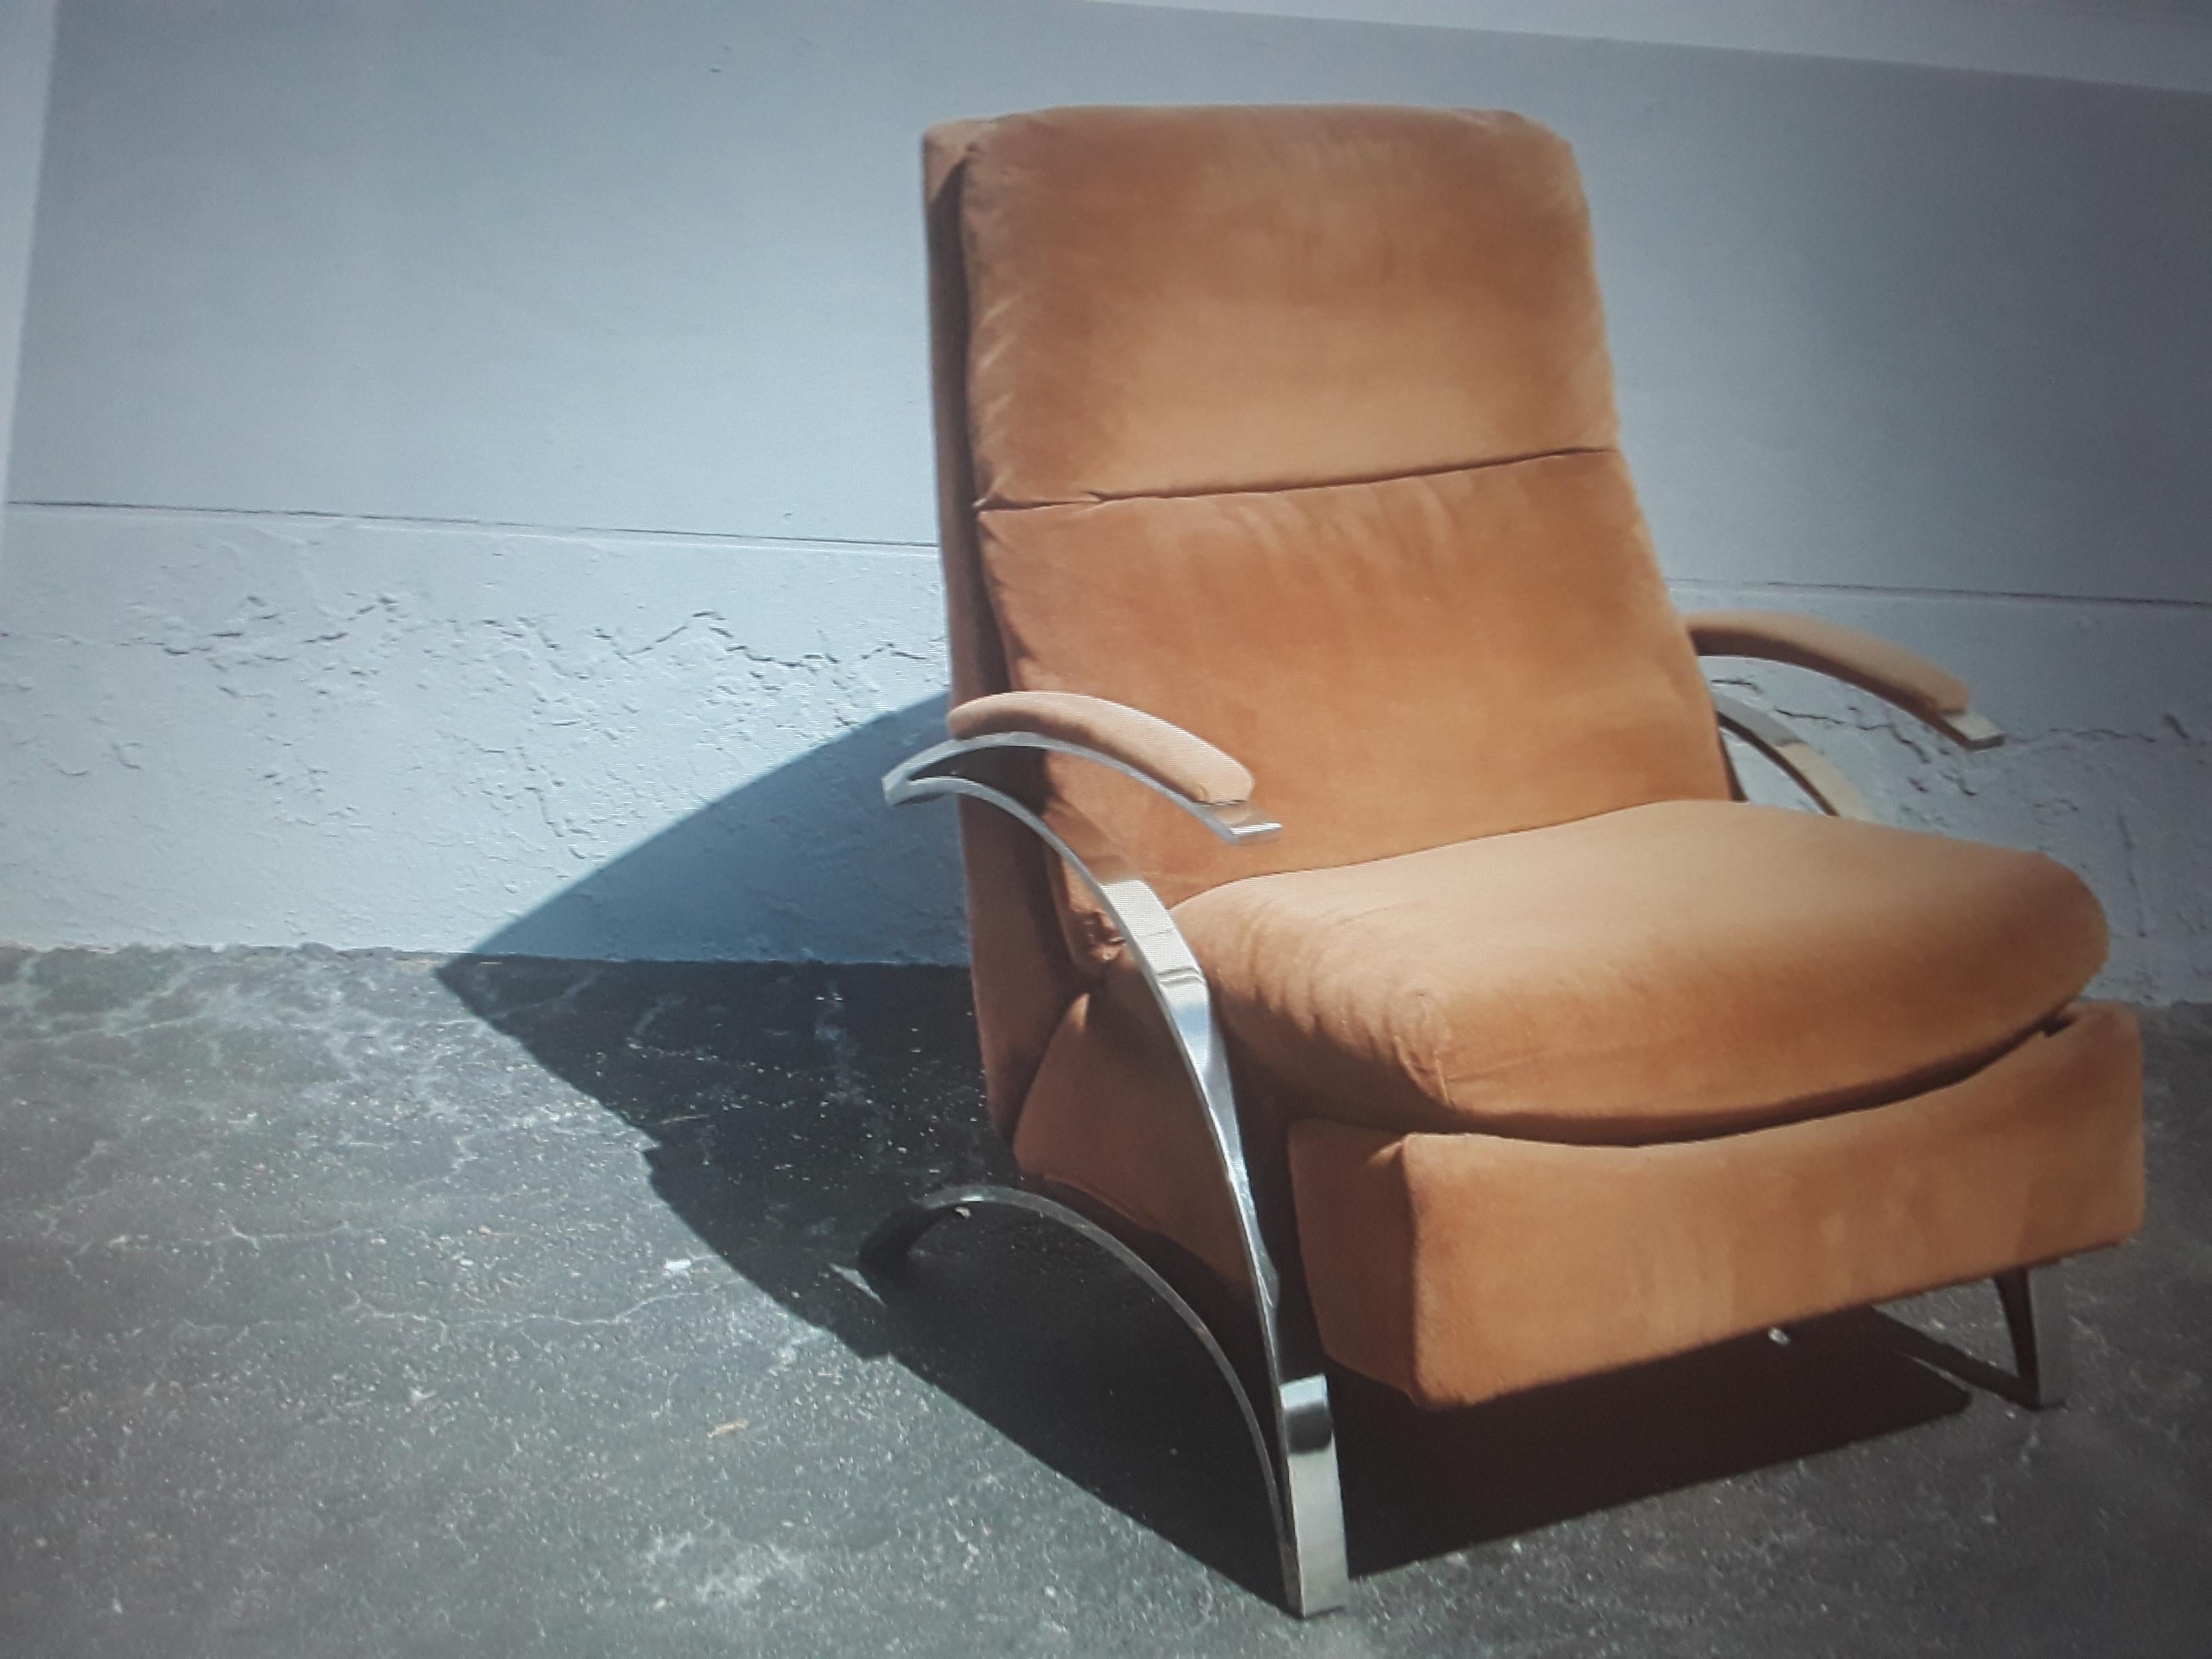 1970's Modern Plush Brown with Chrome Barcalounger Recliner/ Lounge Chair. Very comfortable and when open length is 63 inches.